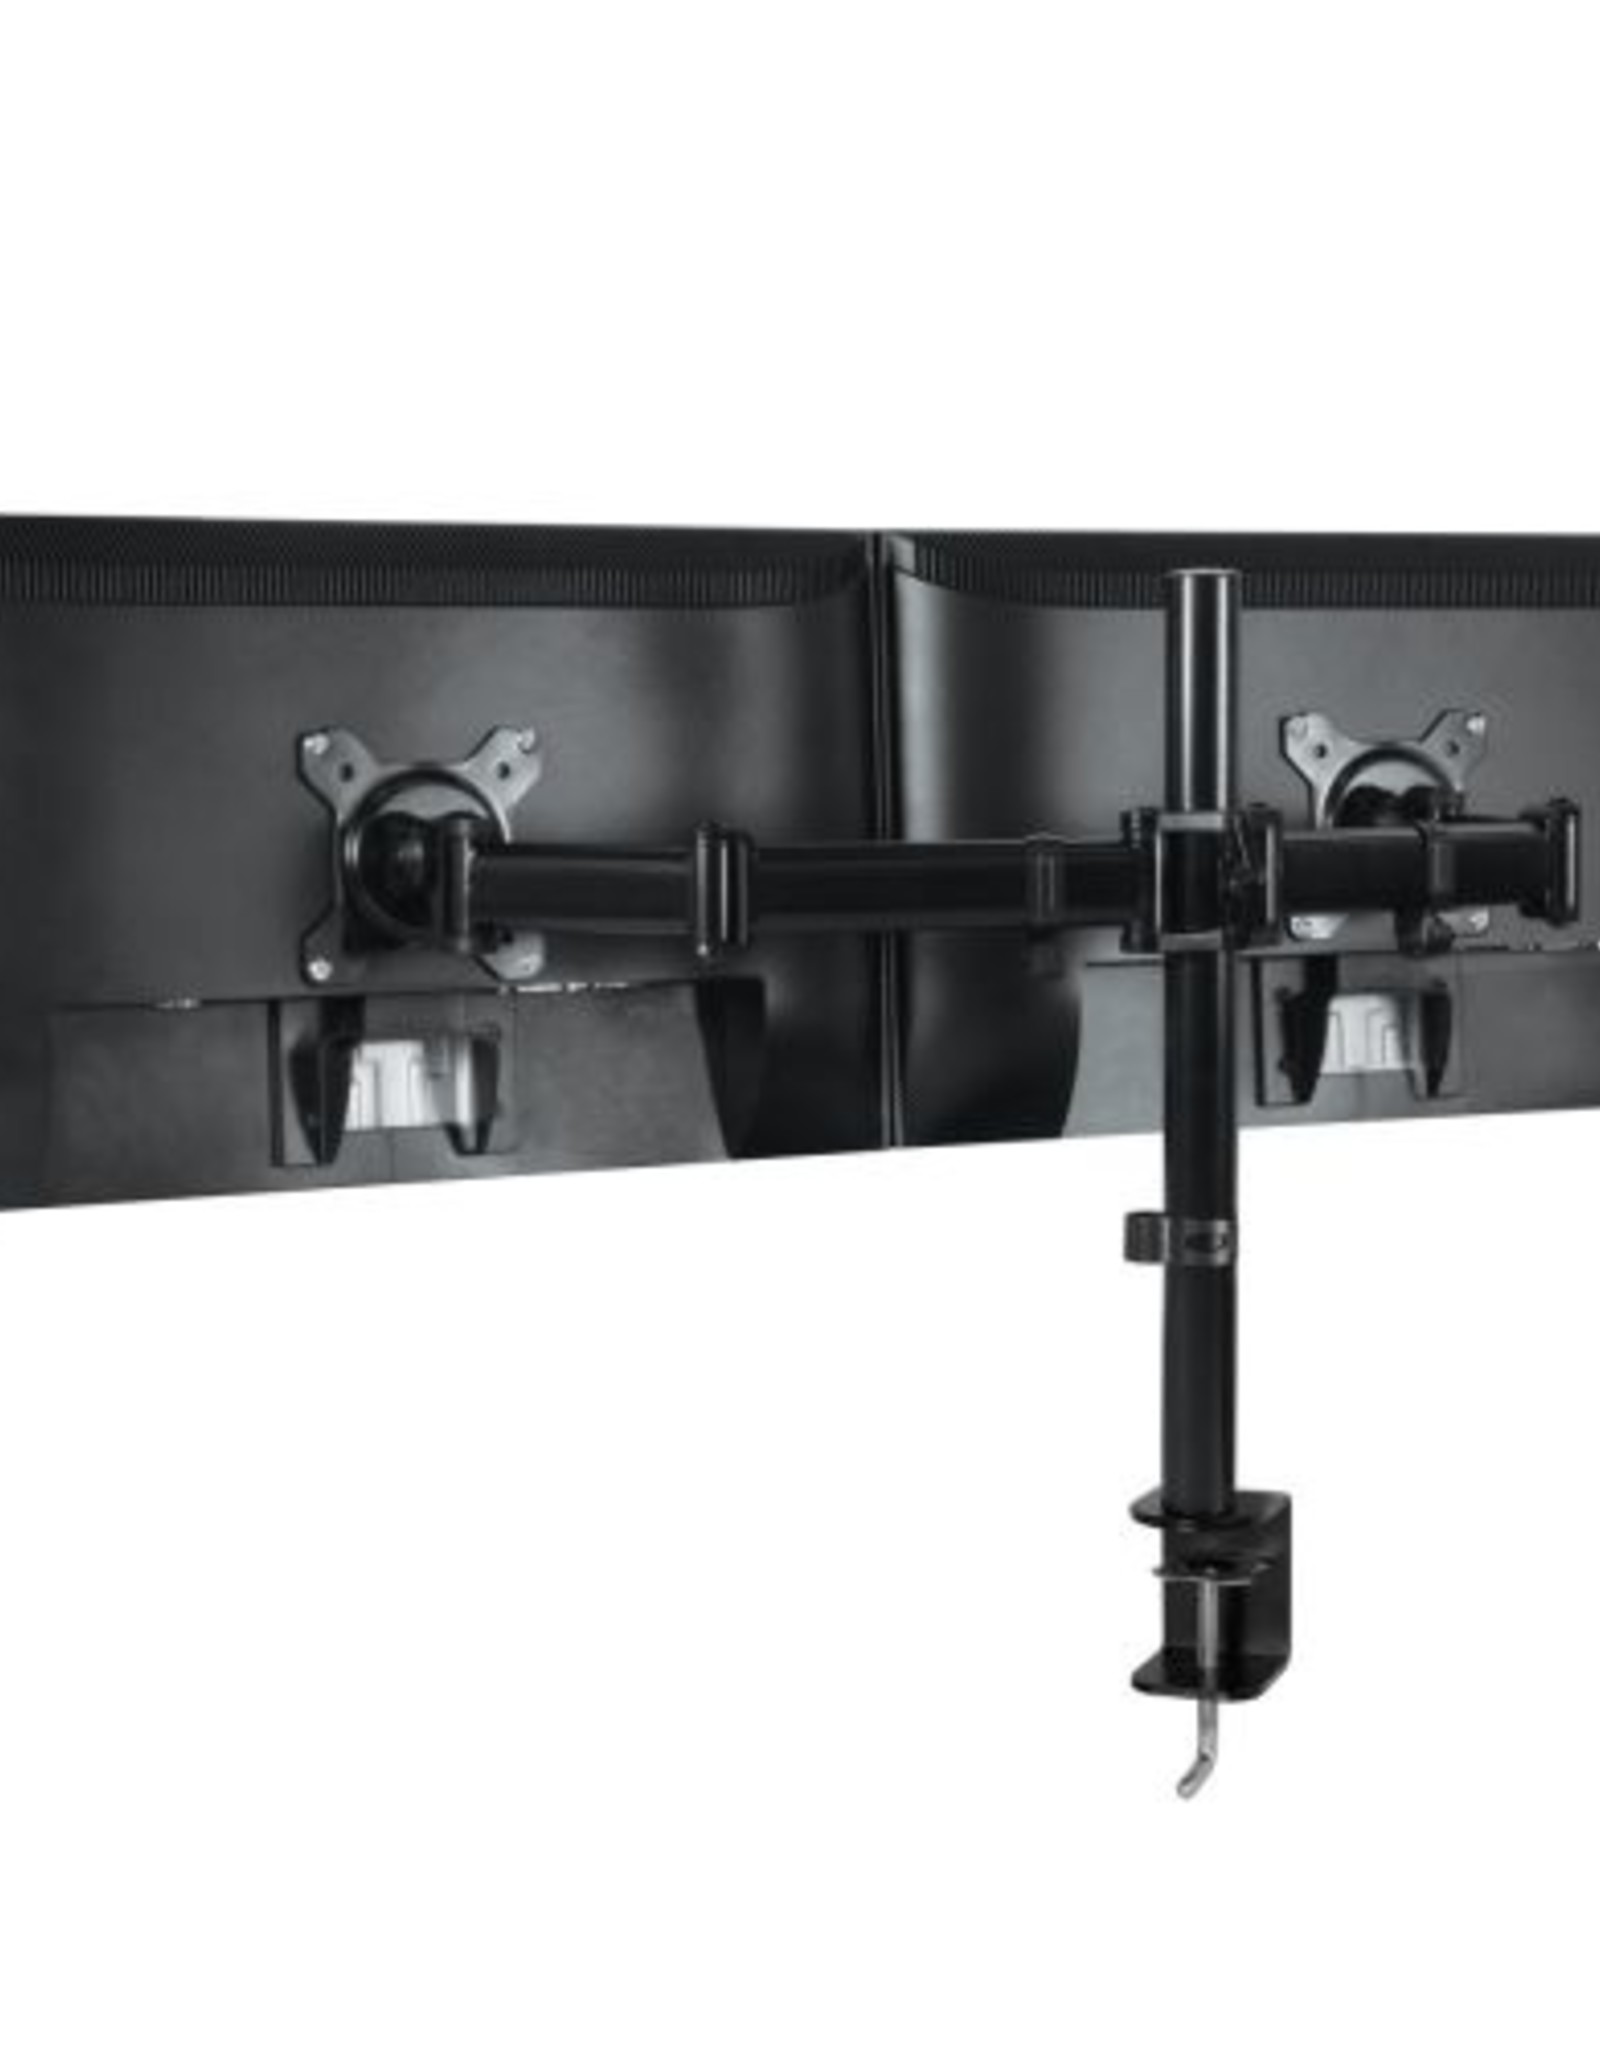 ARCTIC ARCTIC Z2 BASIC TWIN MONITOR DESK STAND, UP TO 27'', VESA 75/100, MAX 8KG